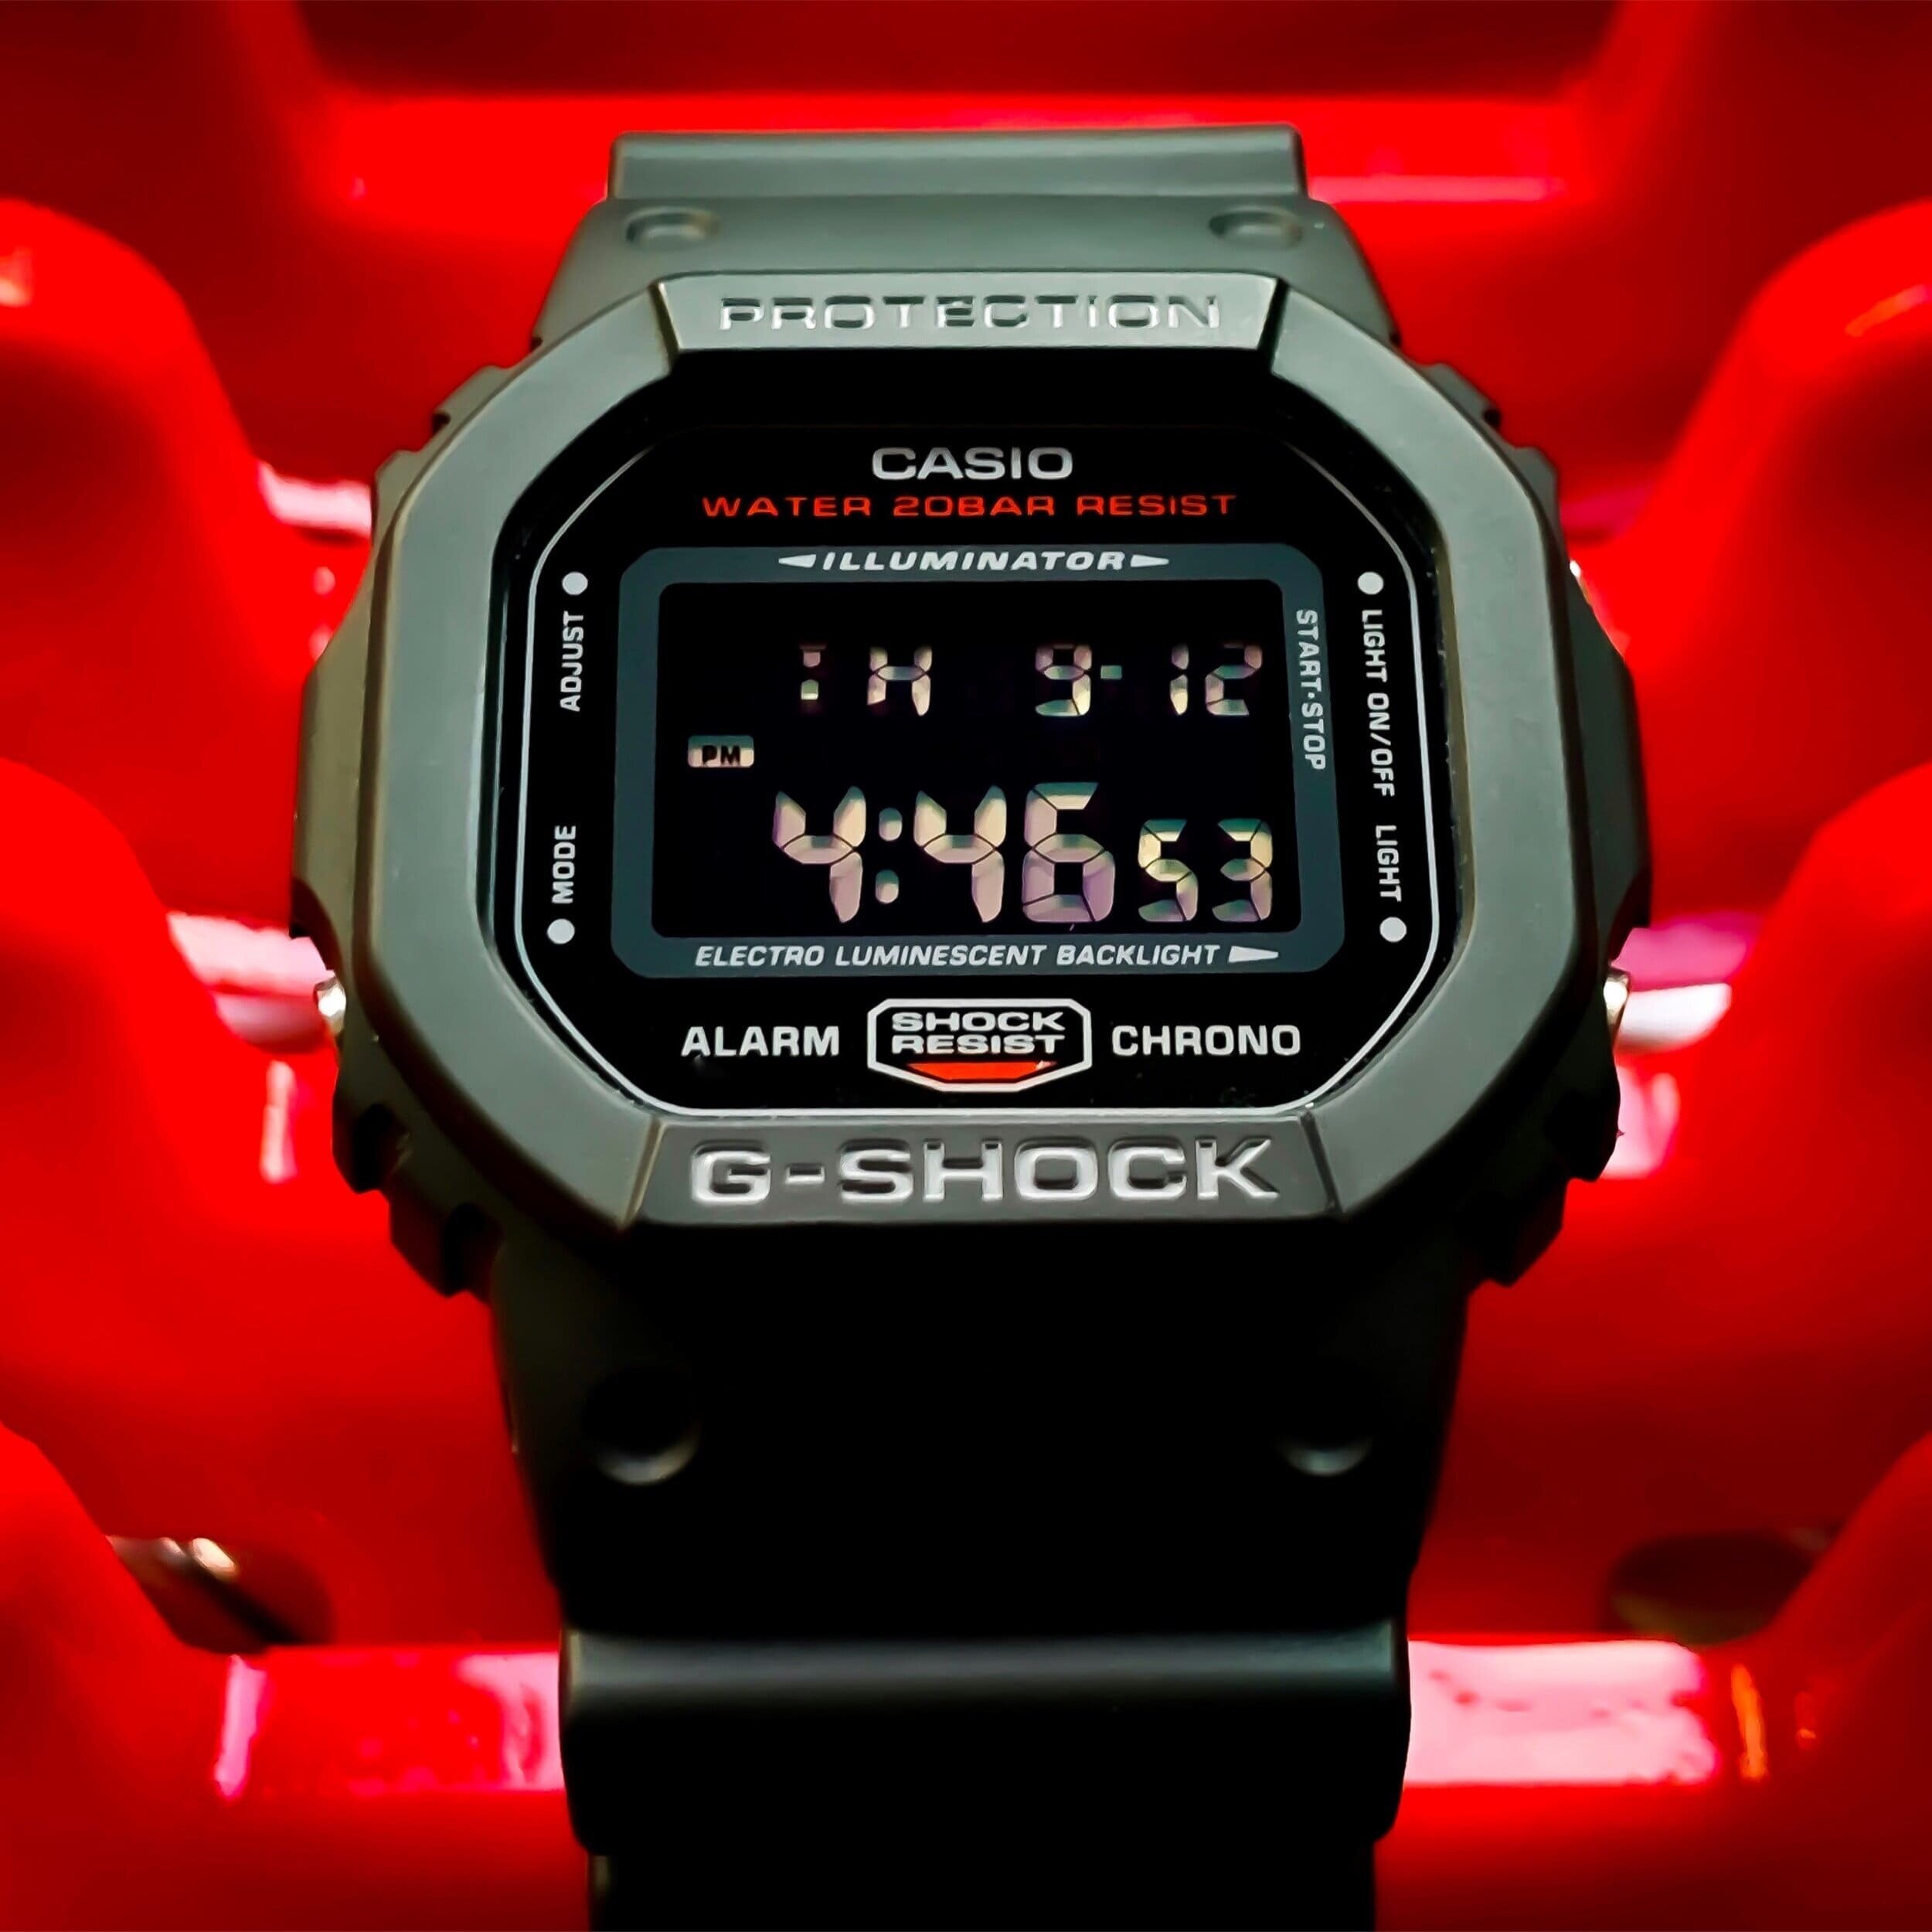 Casio G-Shock DW5600 Watch Review: Is It the Best Beater Watch on 